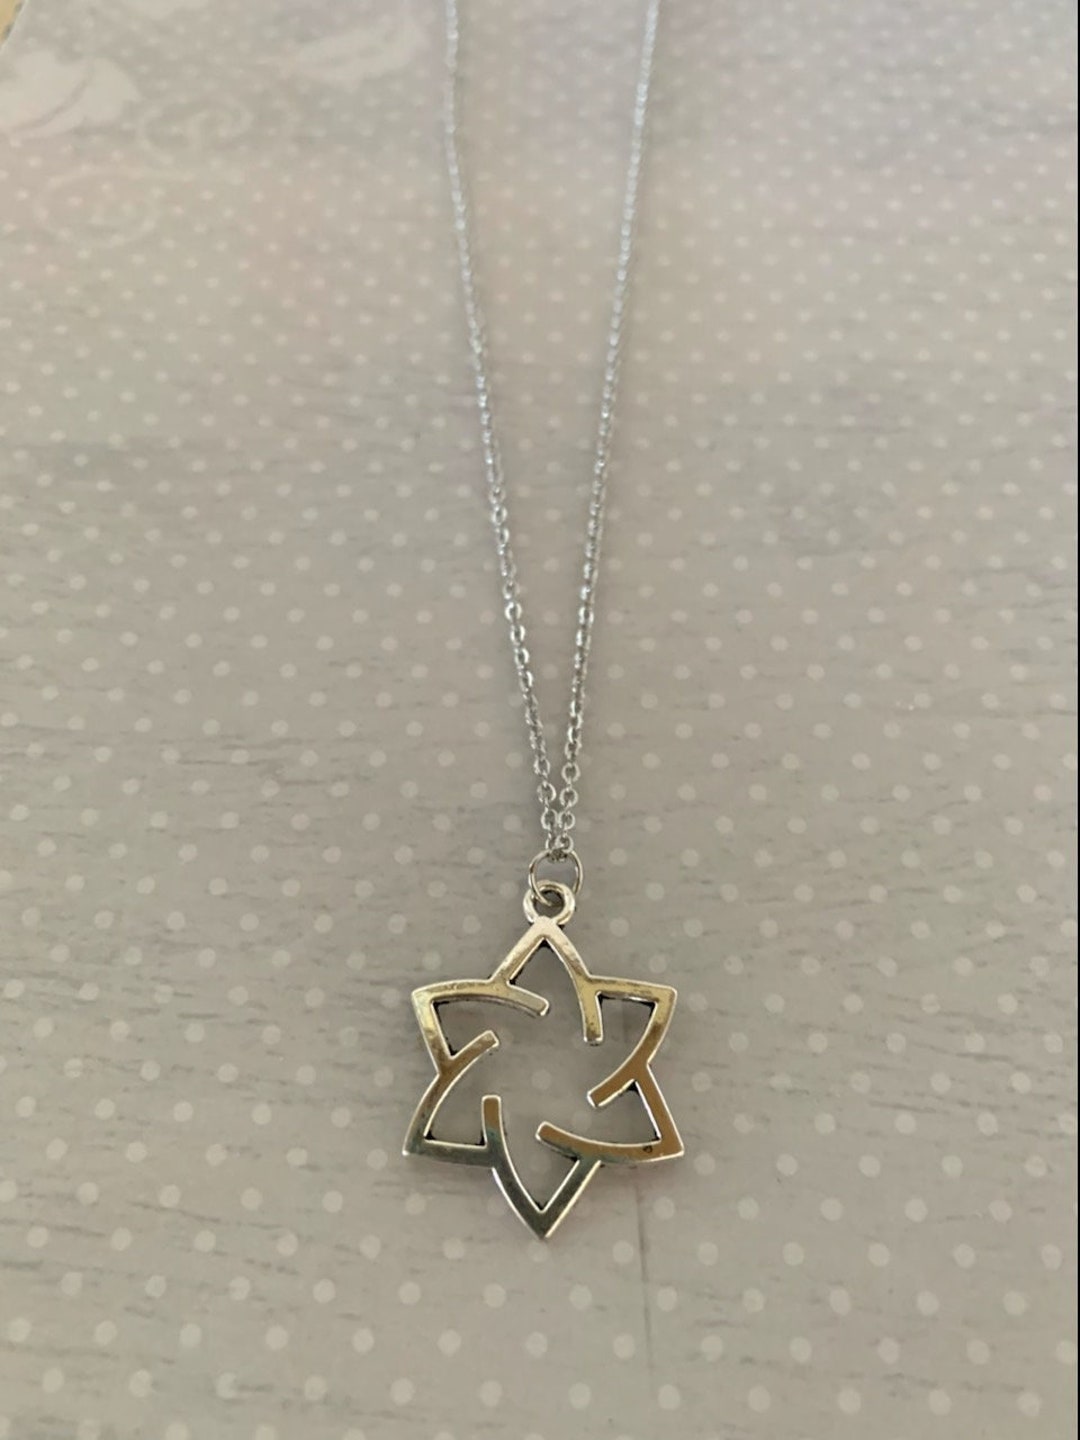 Excellent Authentic Tiffany & Co. Vintage Elsa Peretti 39mm XL Star of David  Silver Pendant Necklace 28 - Etsy